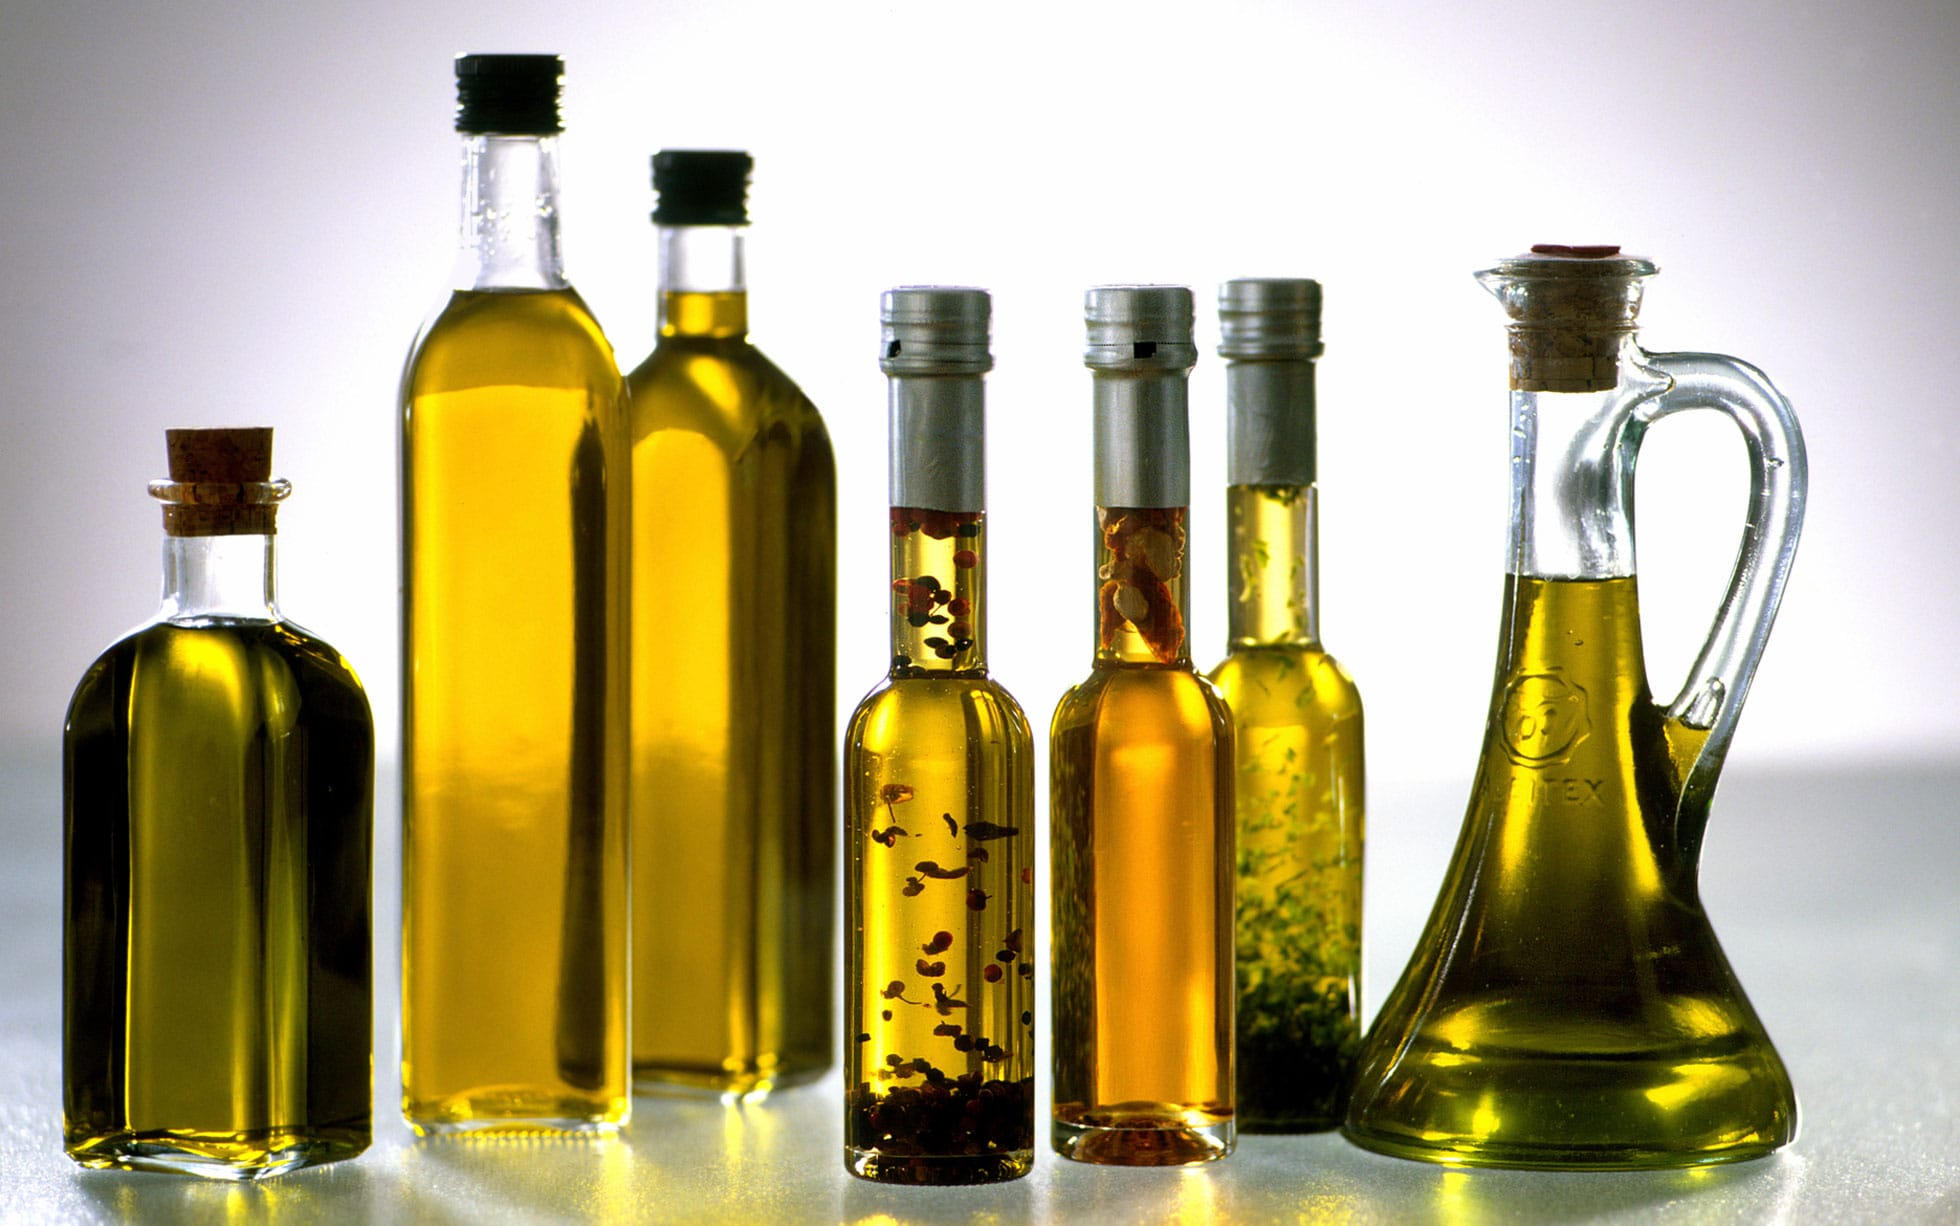 From avocado to argan: the new oils taking over kitchens